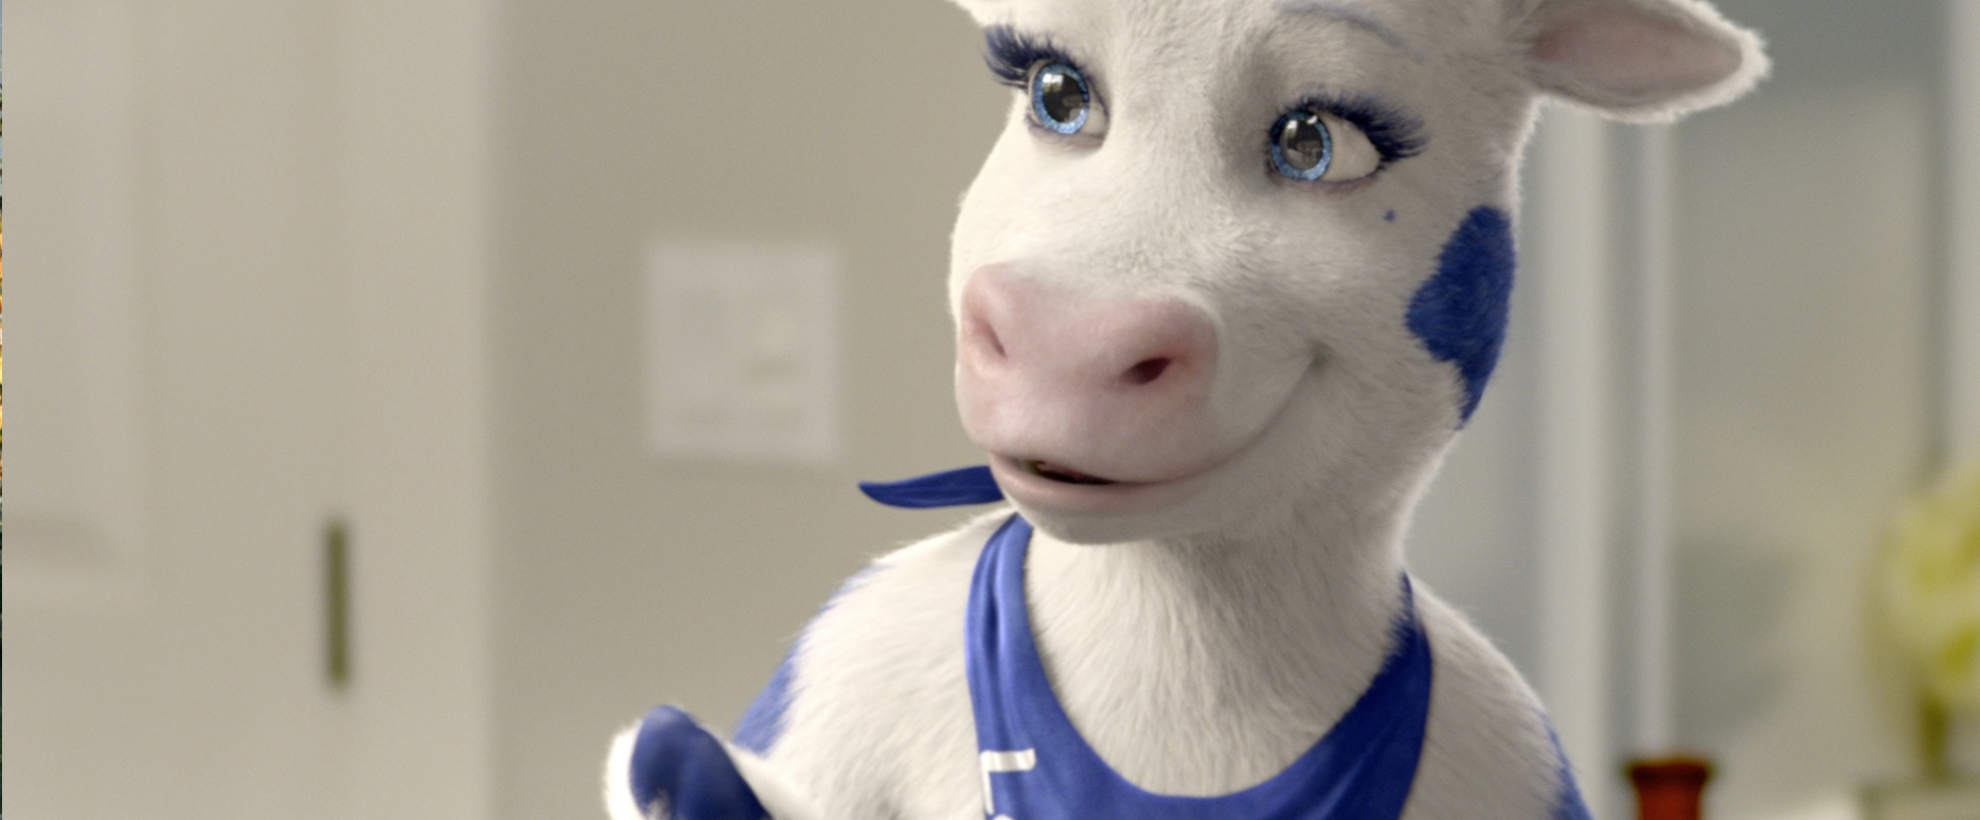 A white cow with blue spots and a blue bandana around her neck